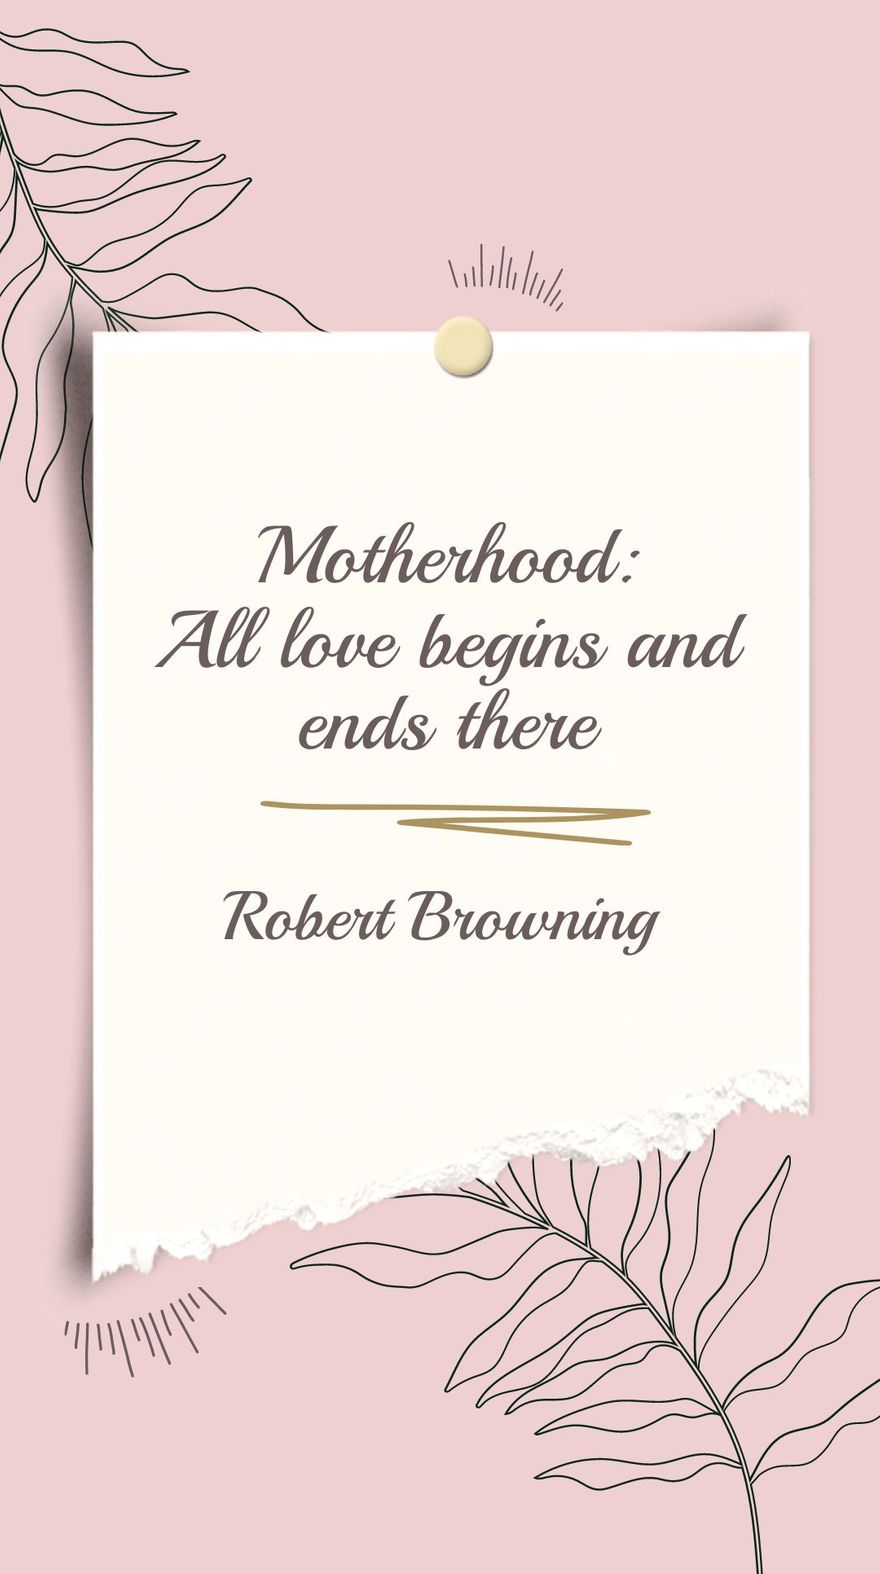 Free Robert Browning - Motherhood: All love begins and ends there.